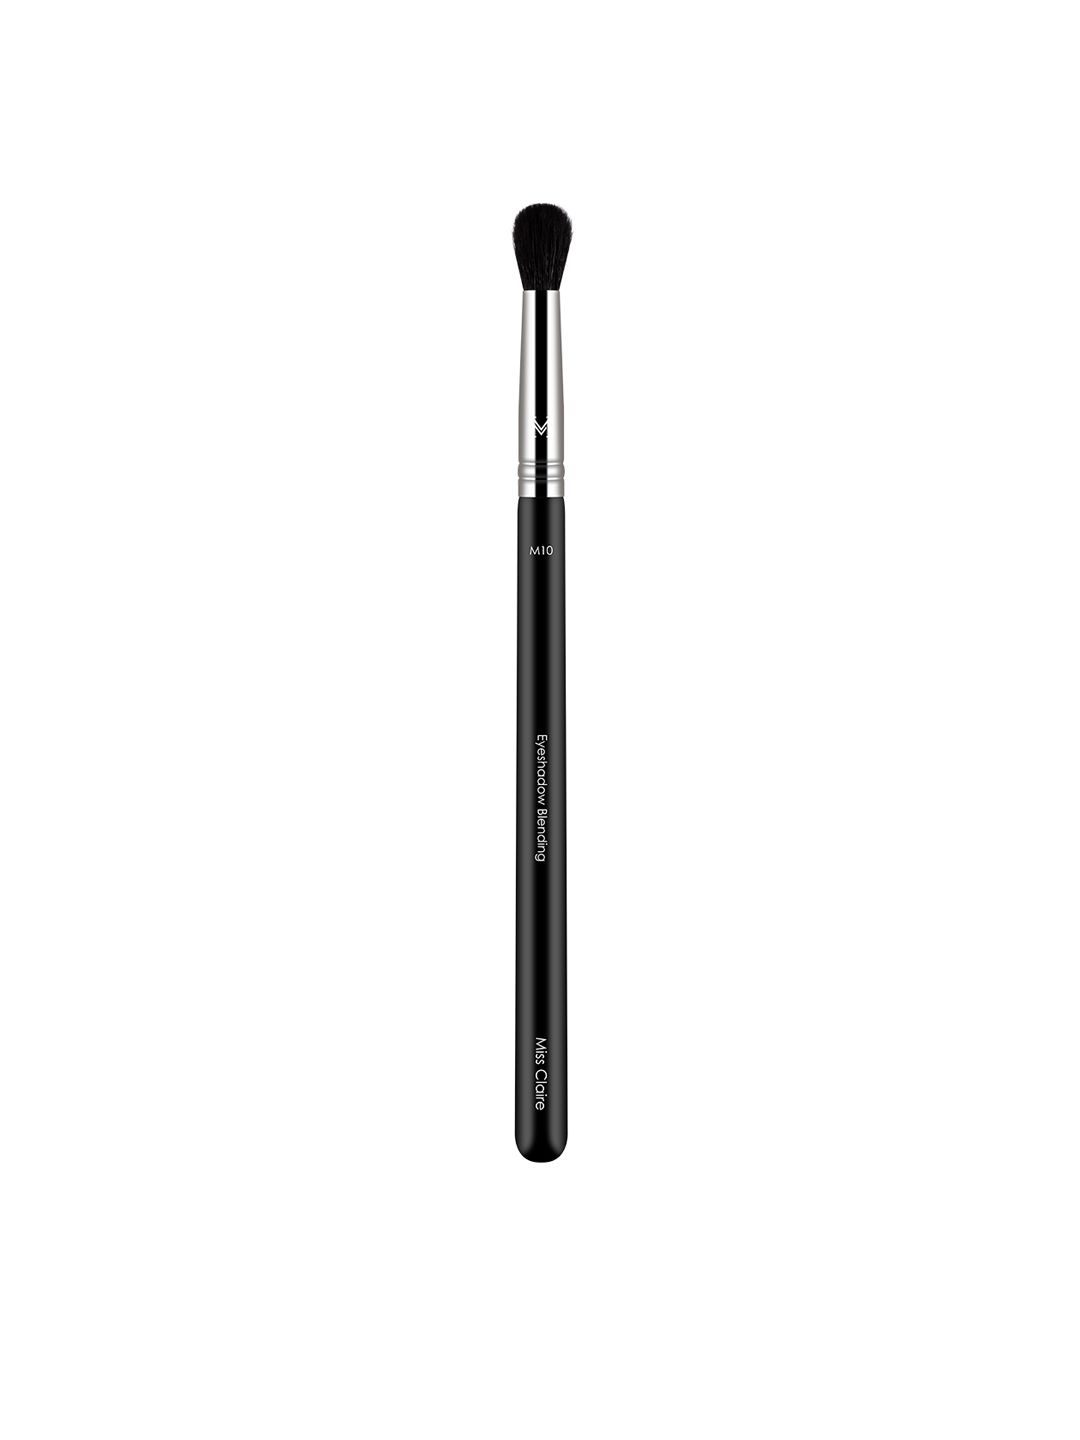 Miss Claire Chrome Eyeshadow Blending Brush - M10 Black & Silver-Toned Price in India